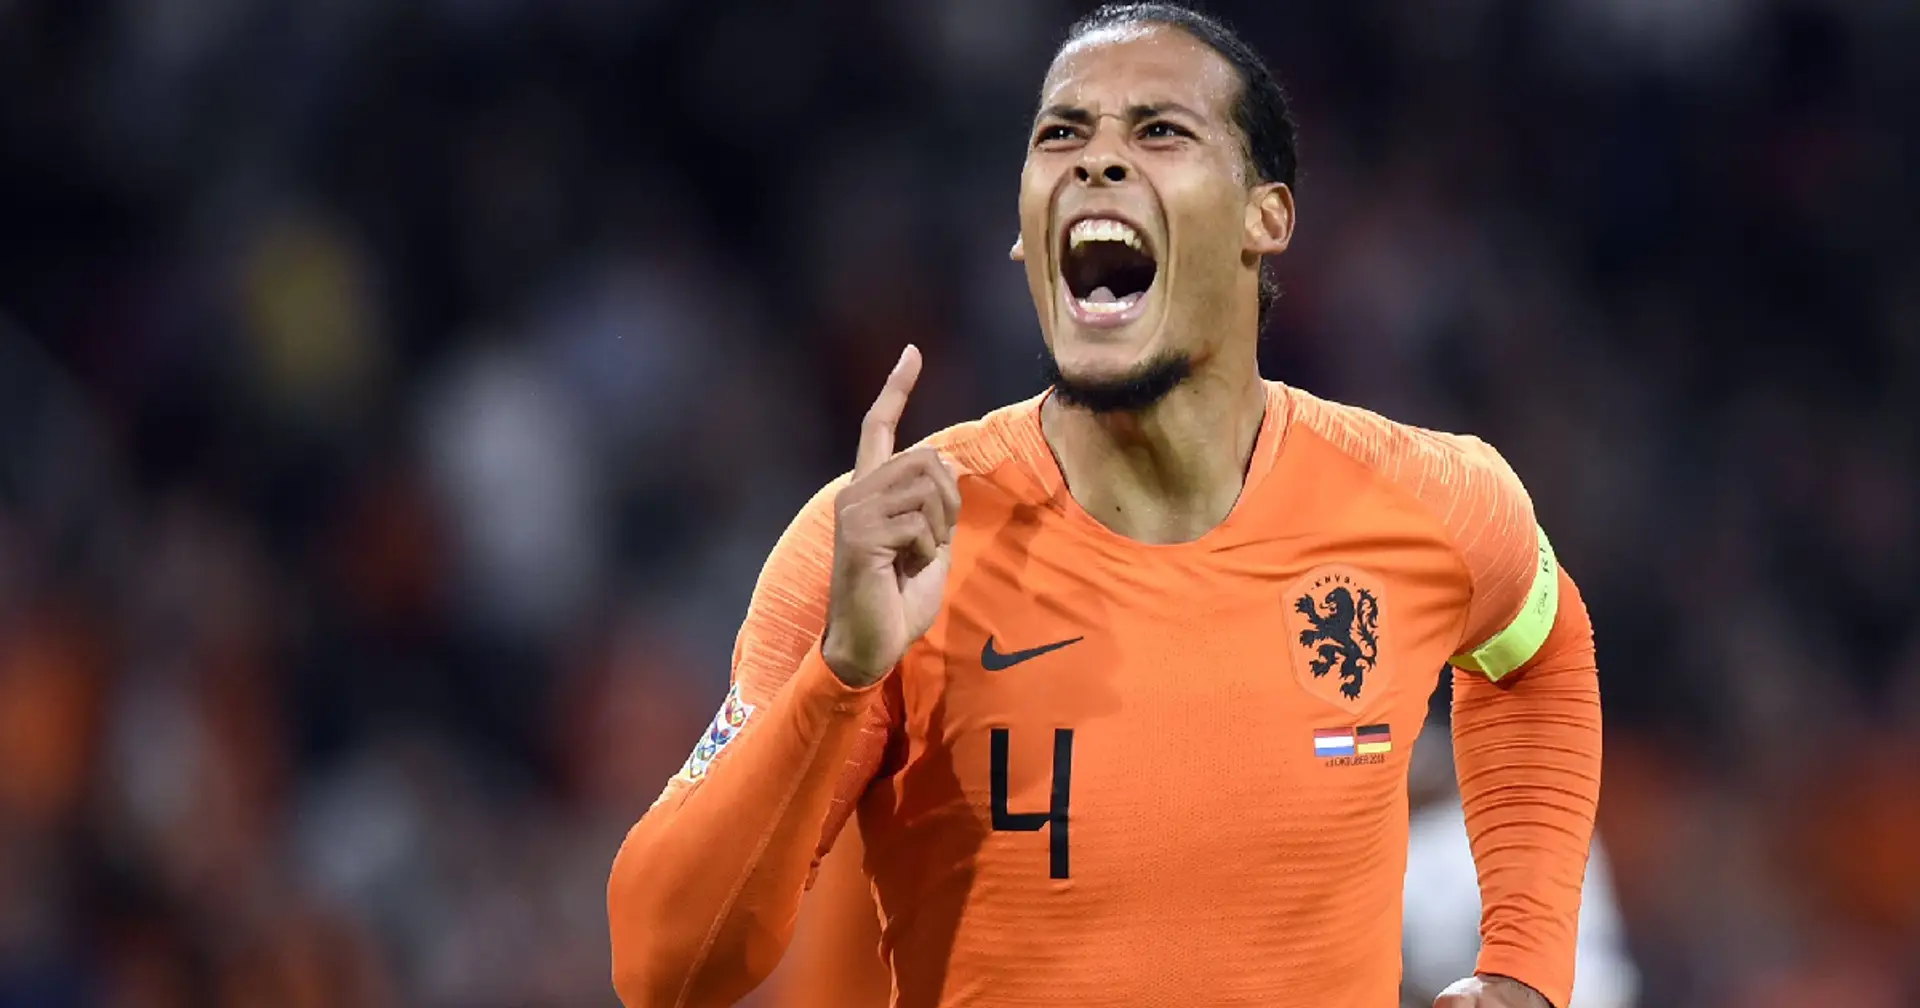 'I think they should stand in his way': Ex-player Trevor Sinclair claims Liverpool should stop Van Dijk from playing Euros